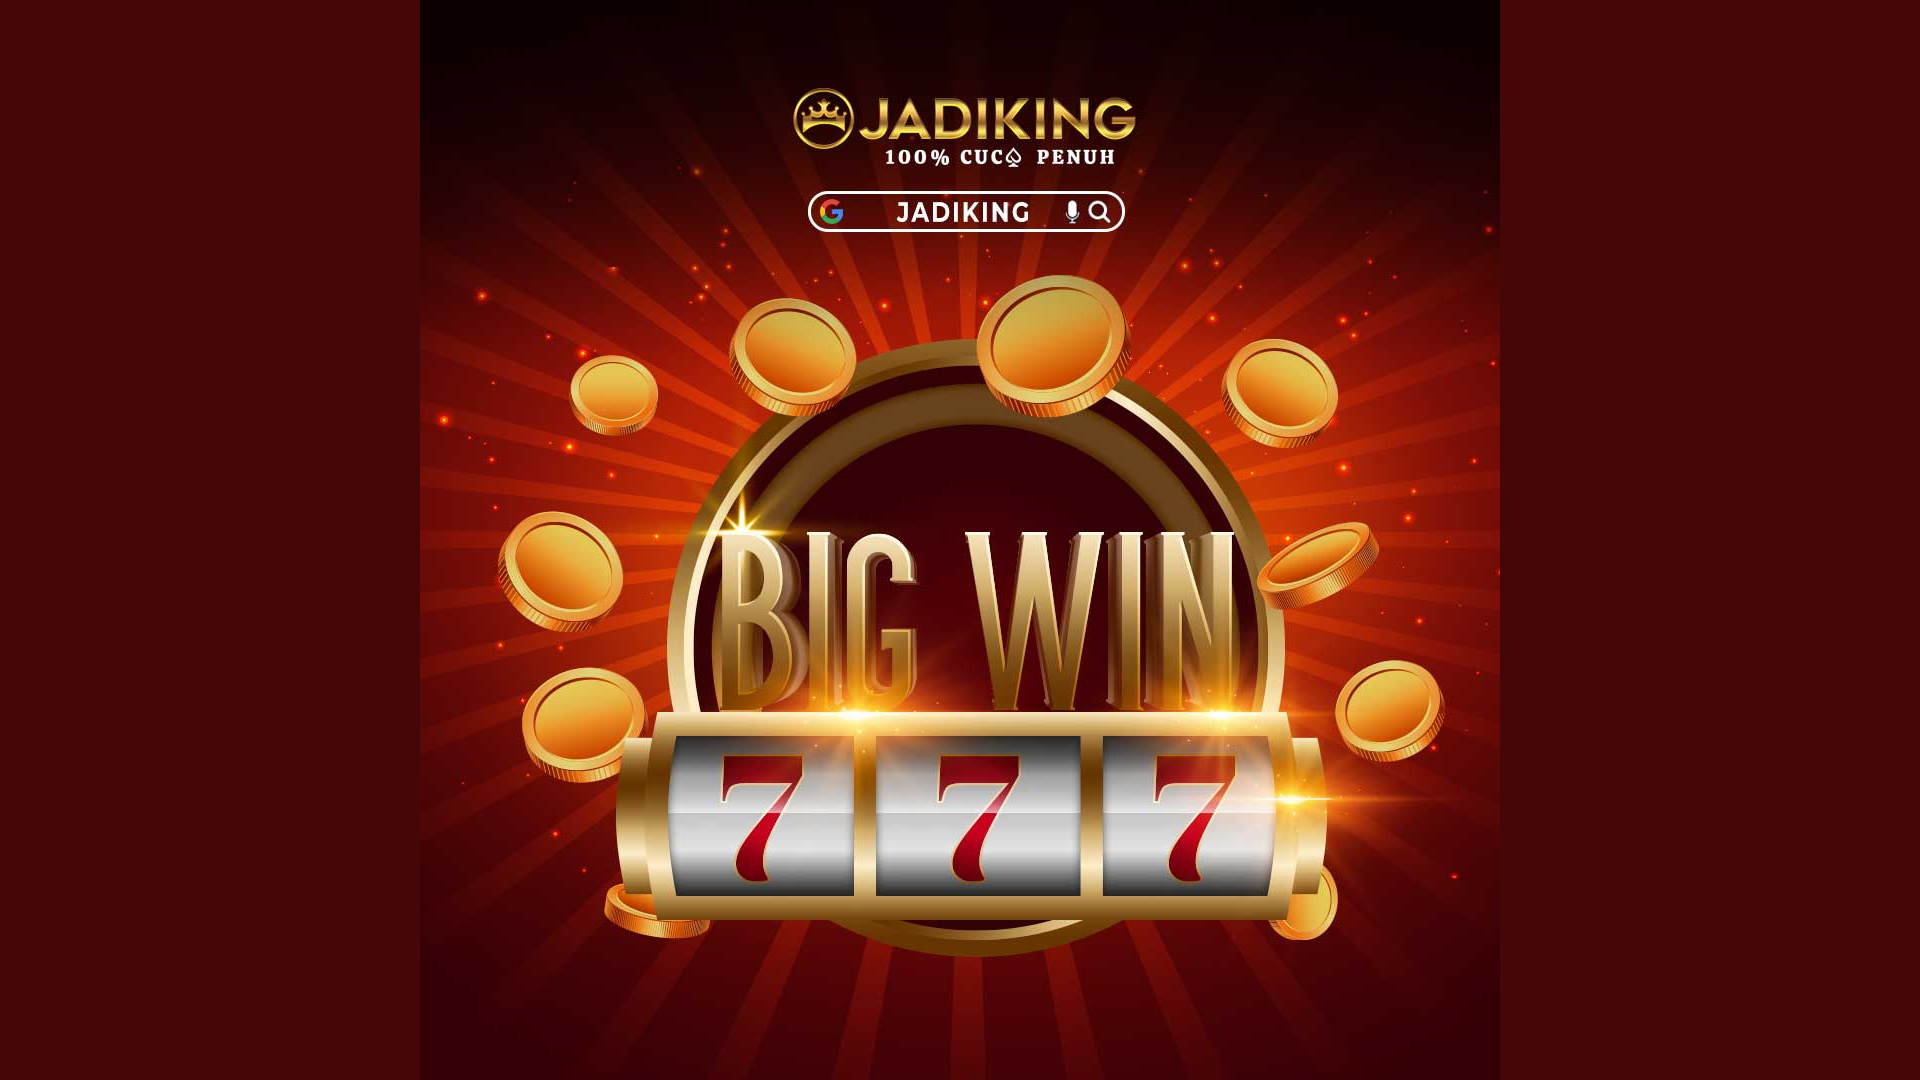 Get Your Game On: How to Maximize your Malaysia Online Casino Free Kredit RM10 in Jadiking88’s Top 5 Games